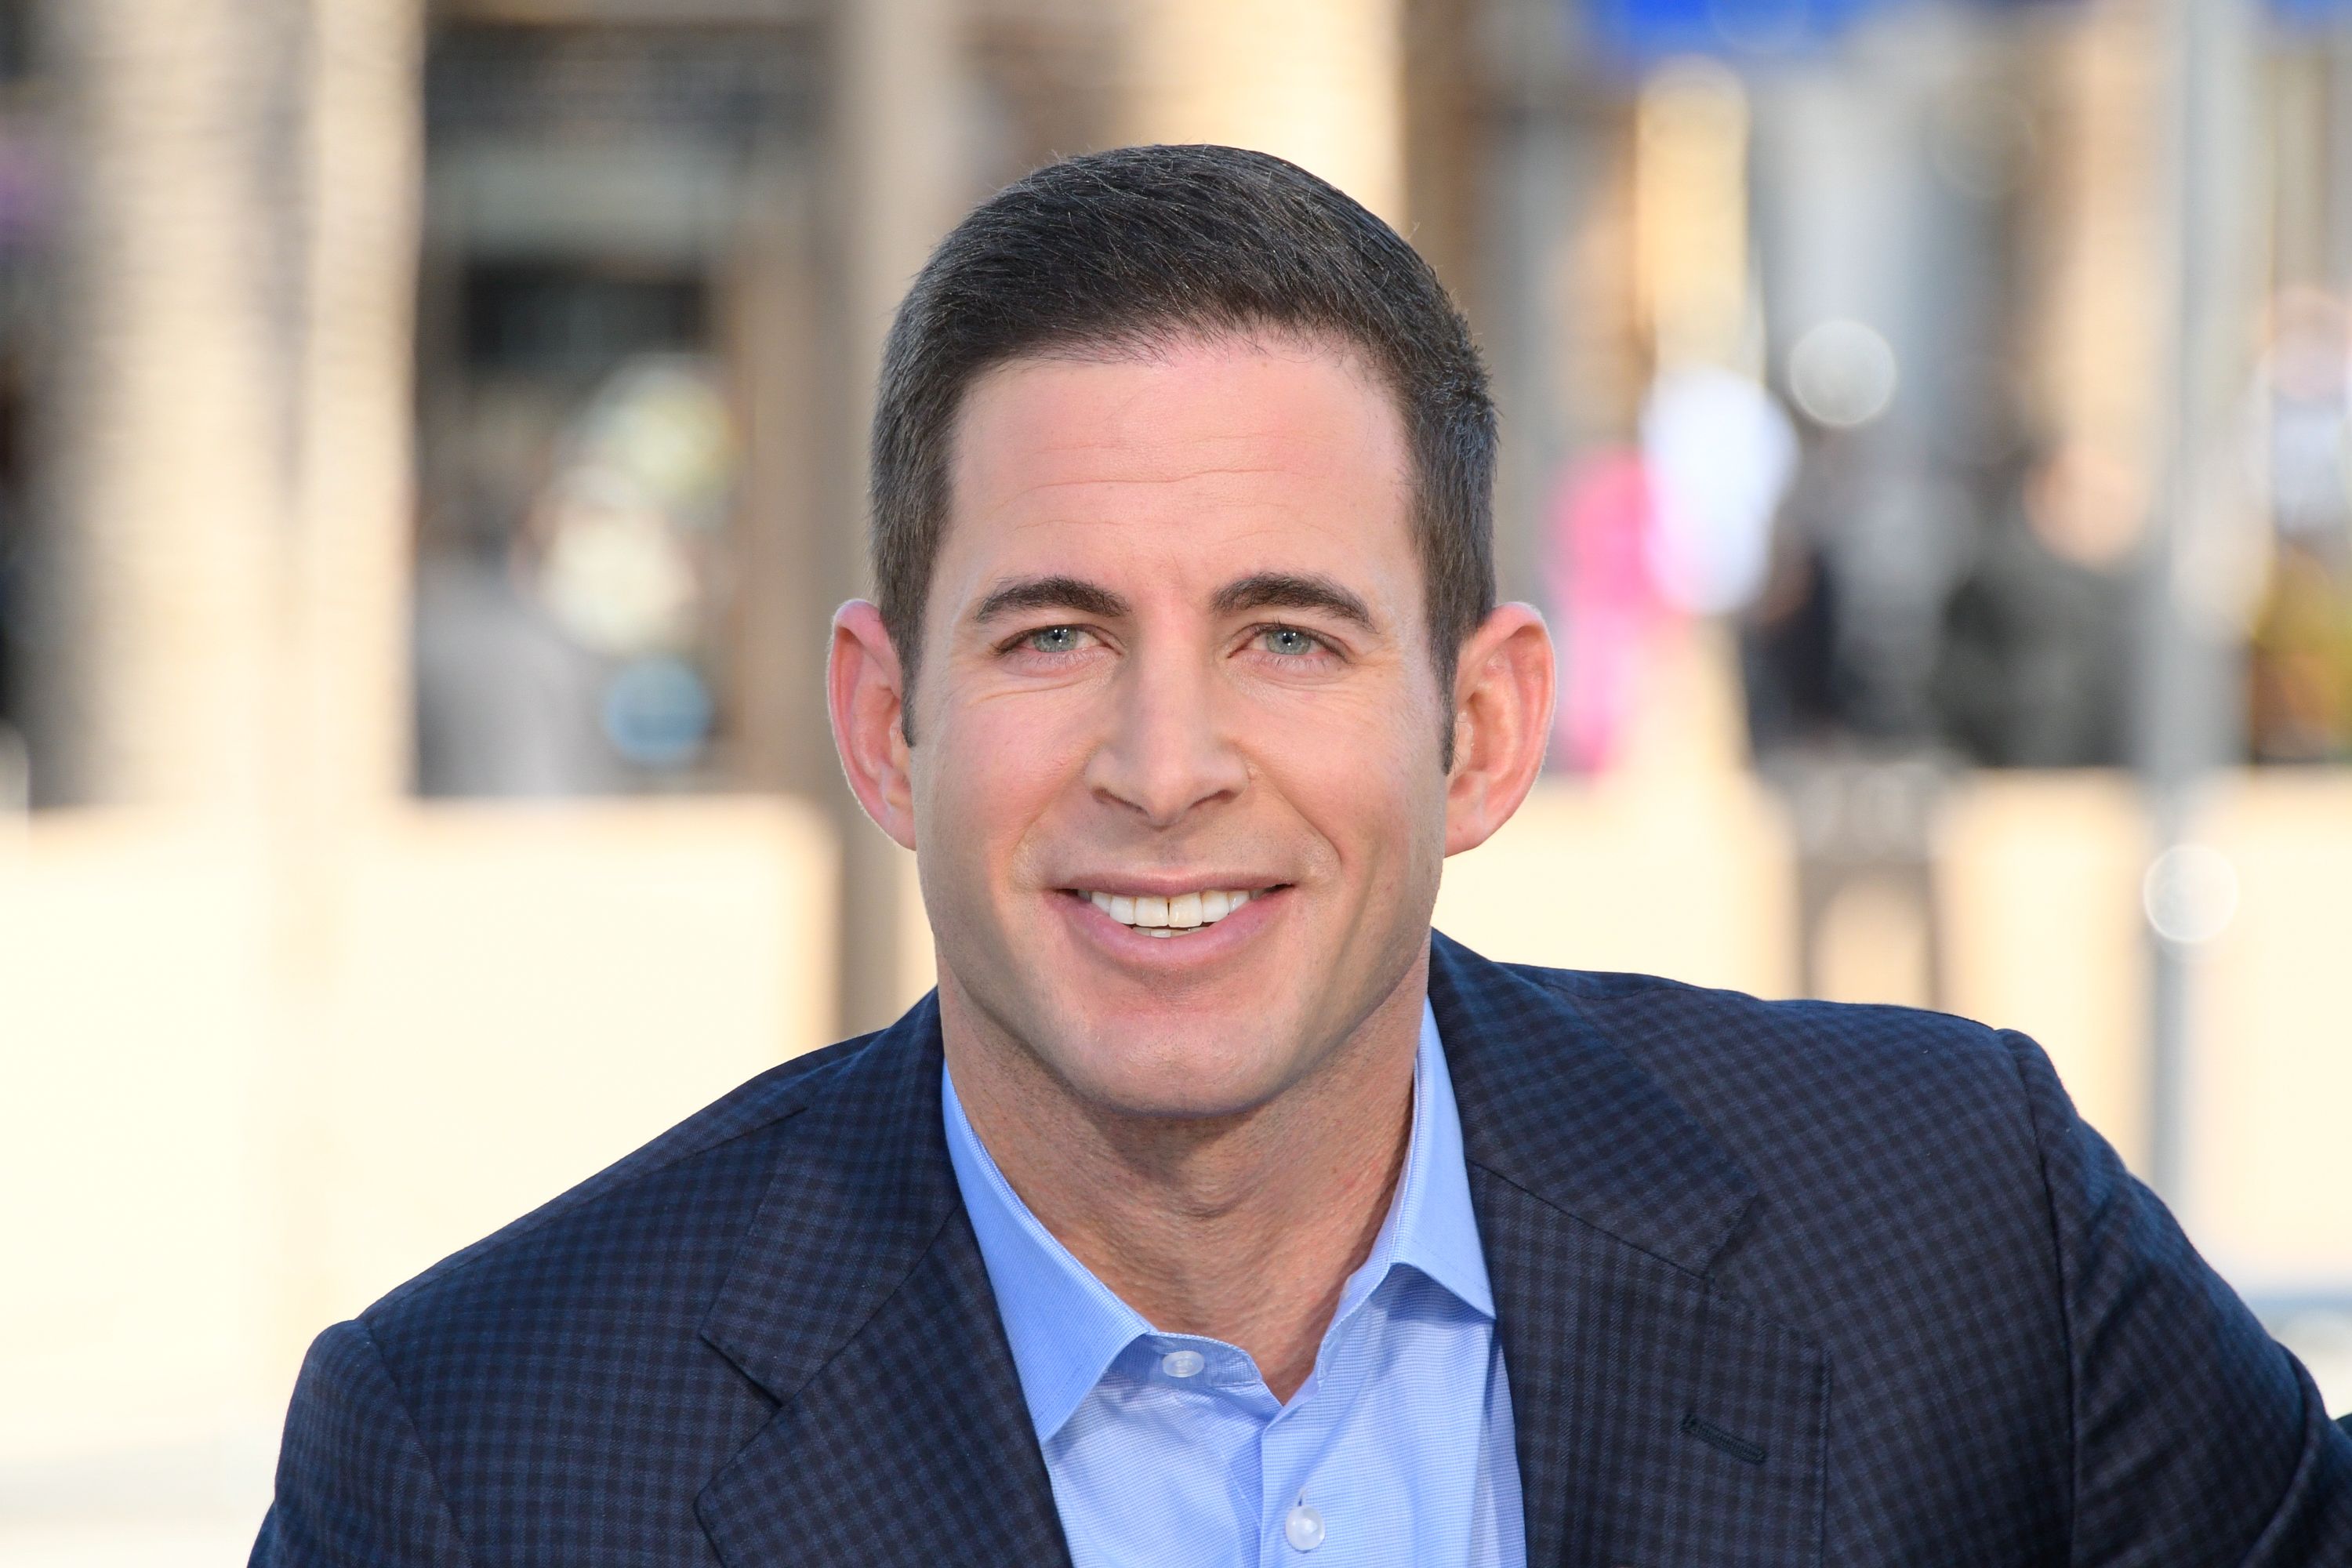 Tarek El Moussa visits "Extra" at Universal Studios Hollywood on February 28, 2017, in Universal City, California | Photo: Noel Vasquez/Getty Images